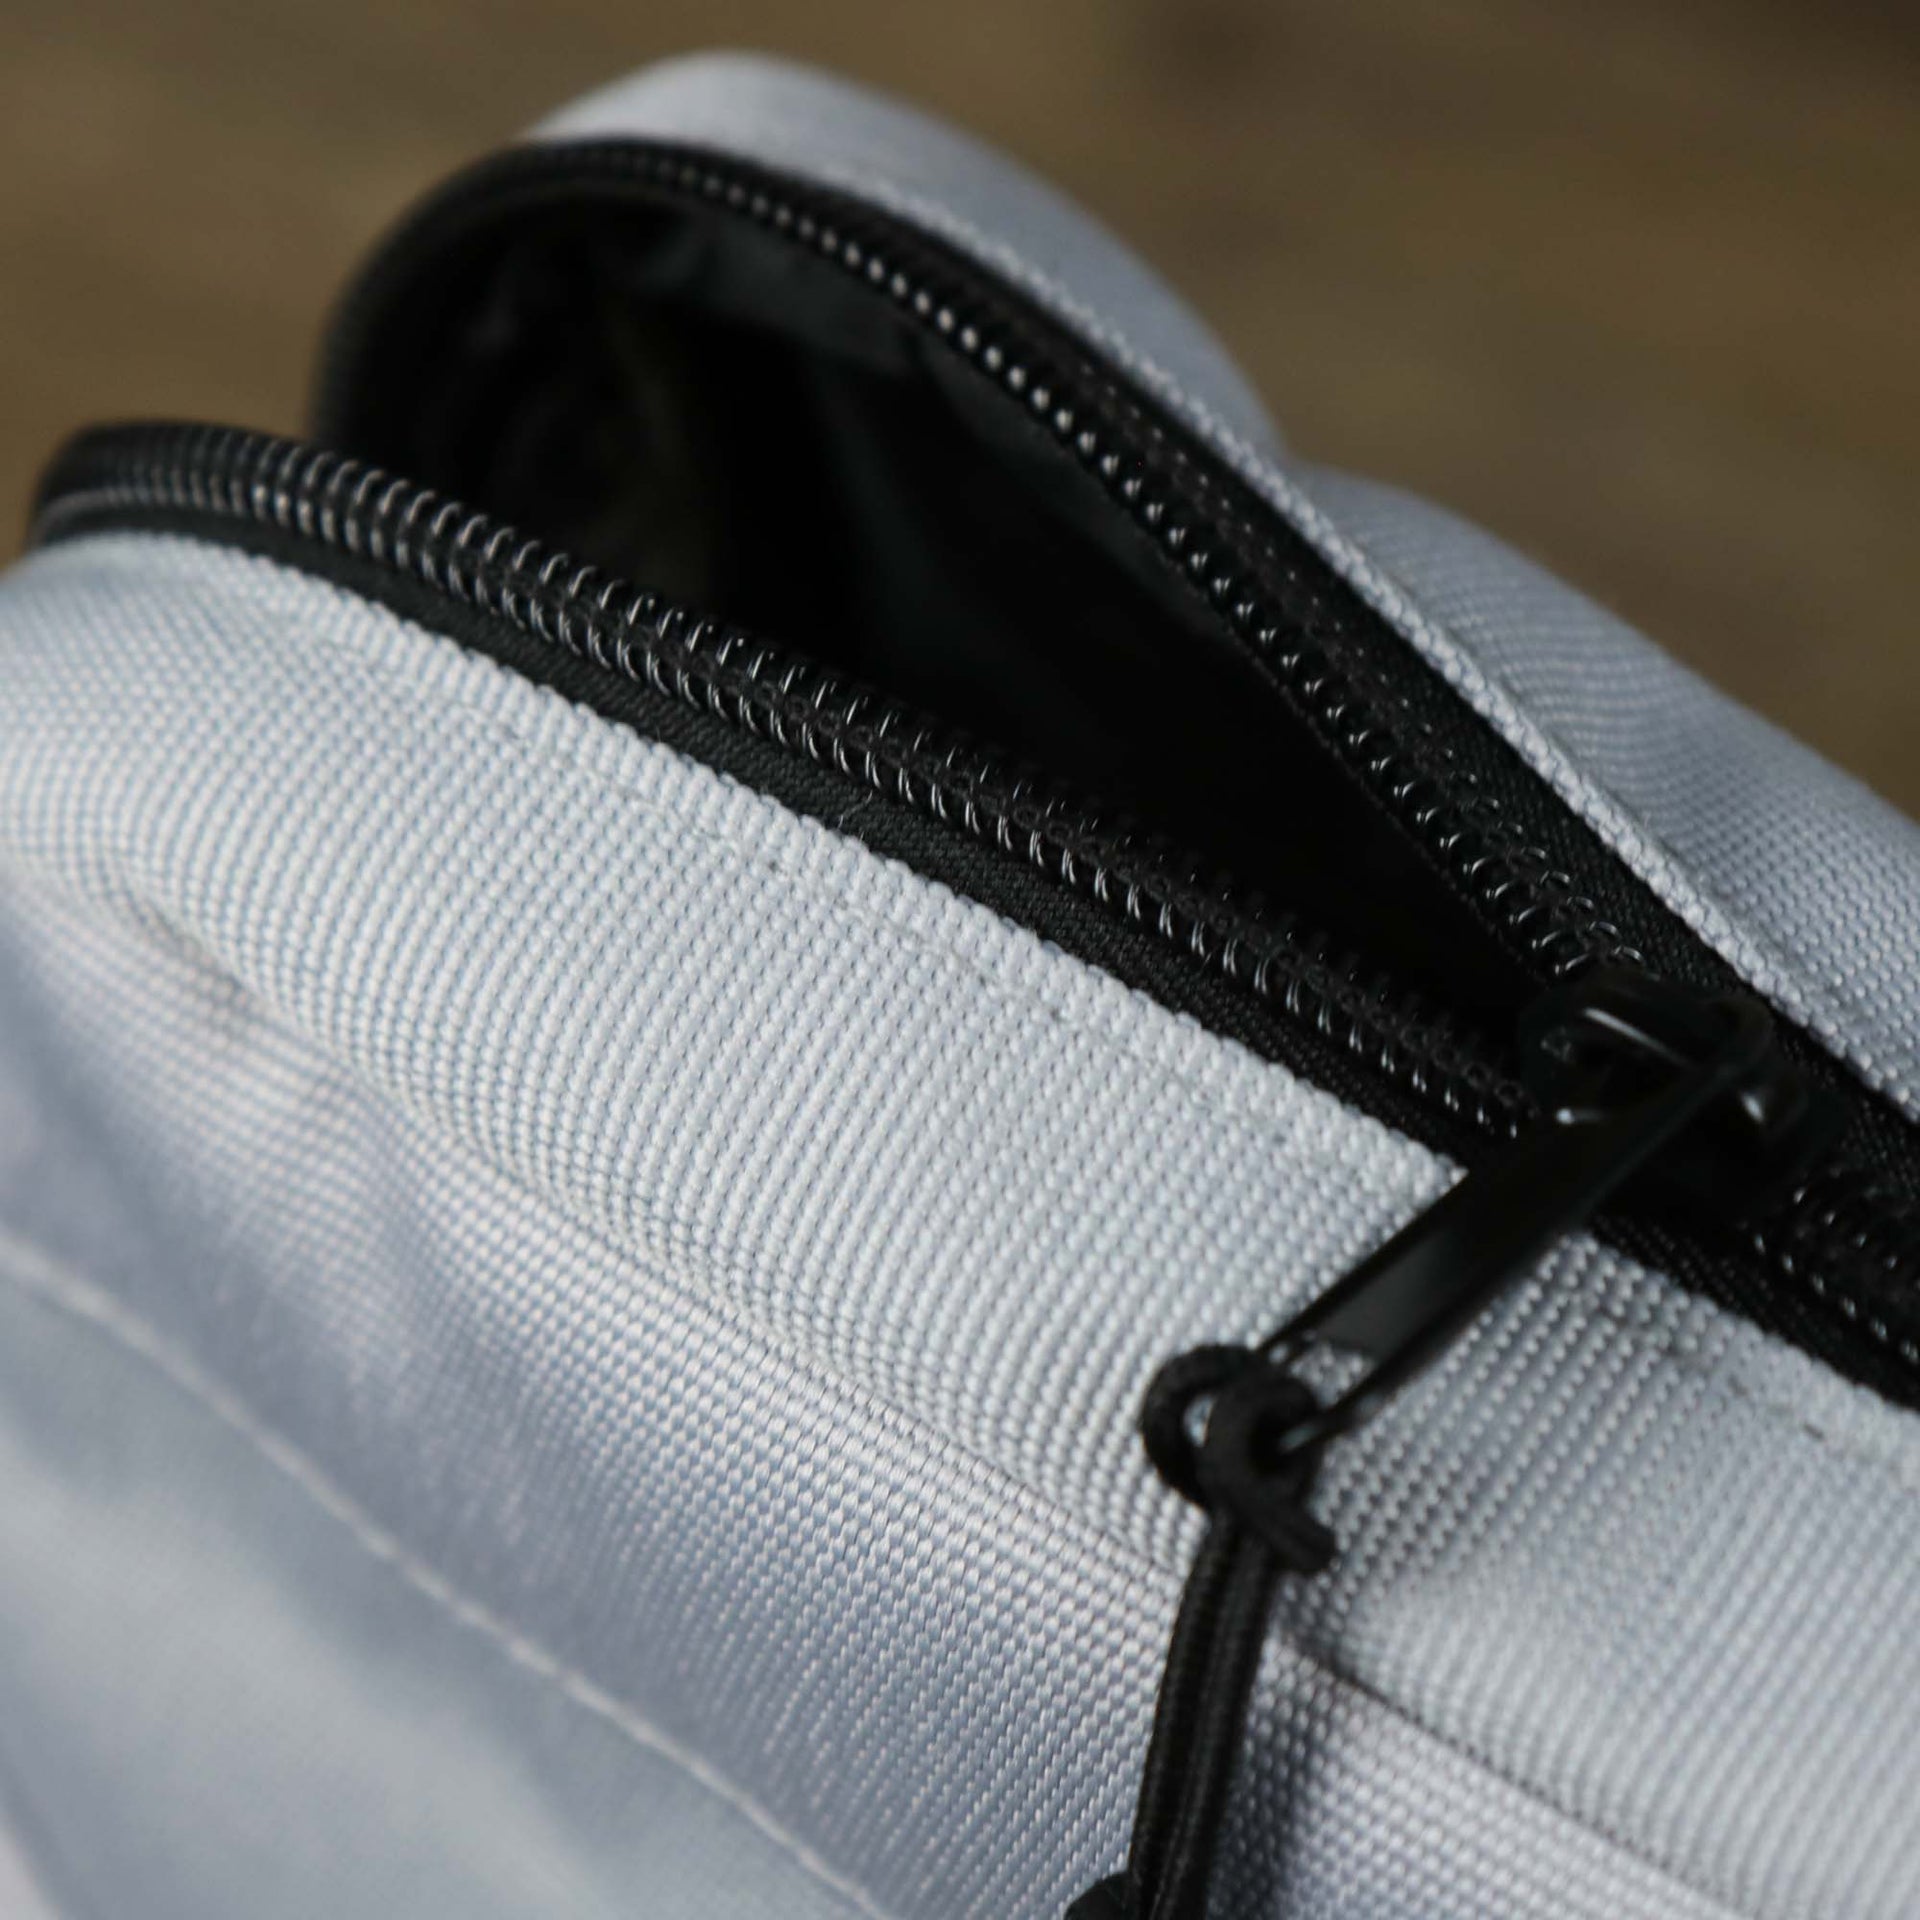 The main zipper open on the Essential Nylon Shoulder Bag Streetwear with Mesh Pocket | Official Gray